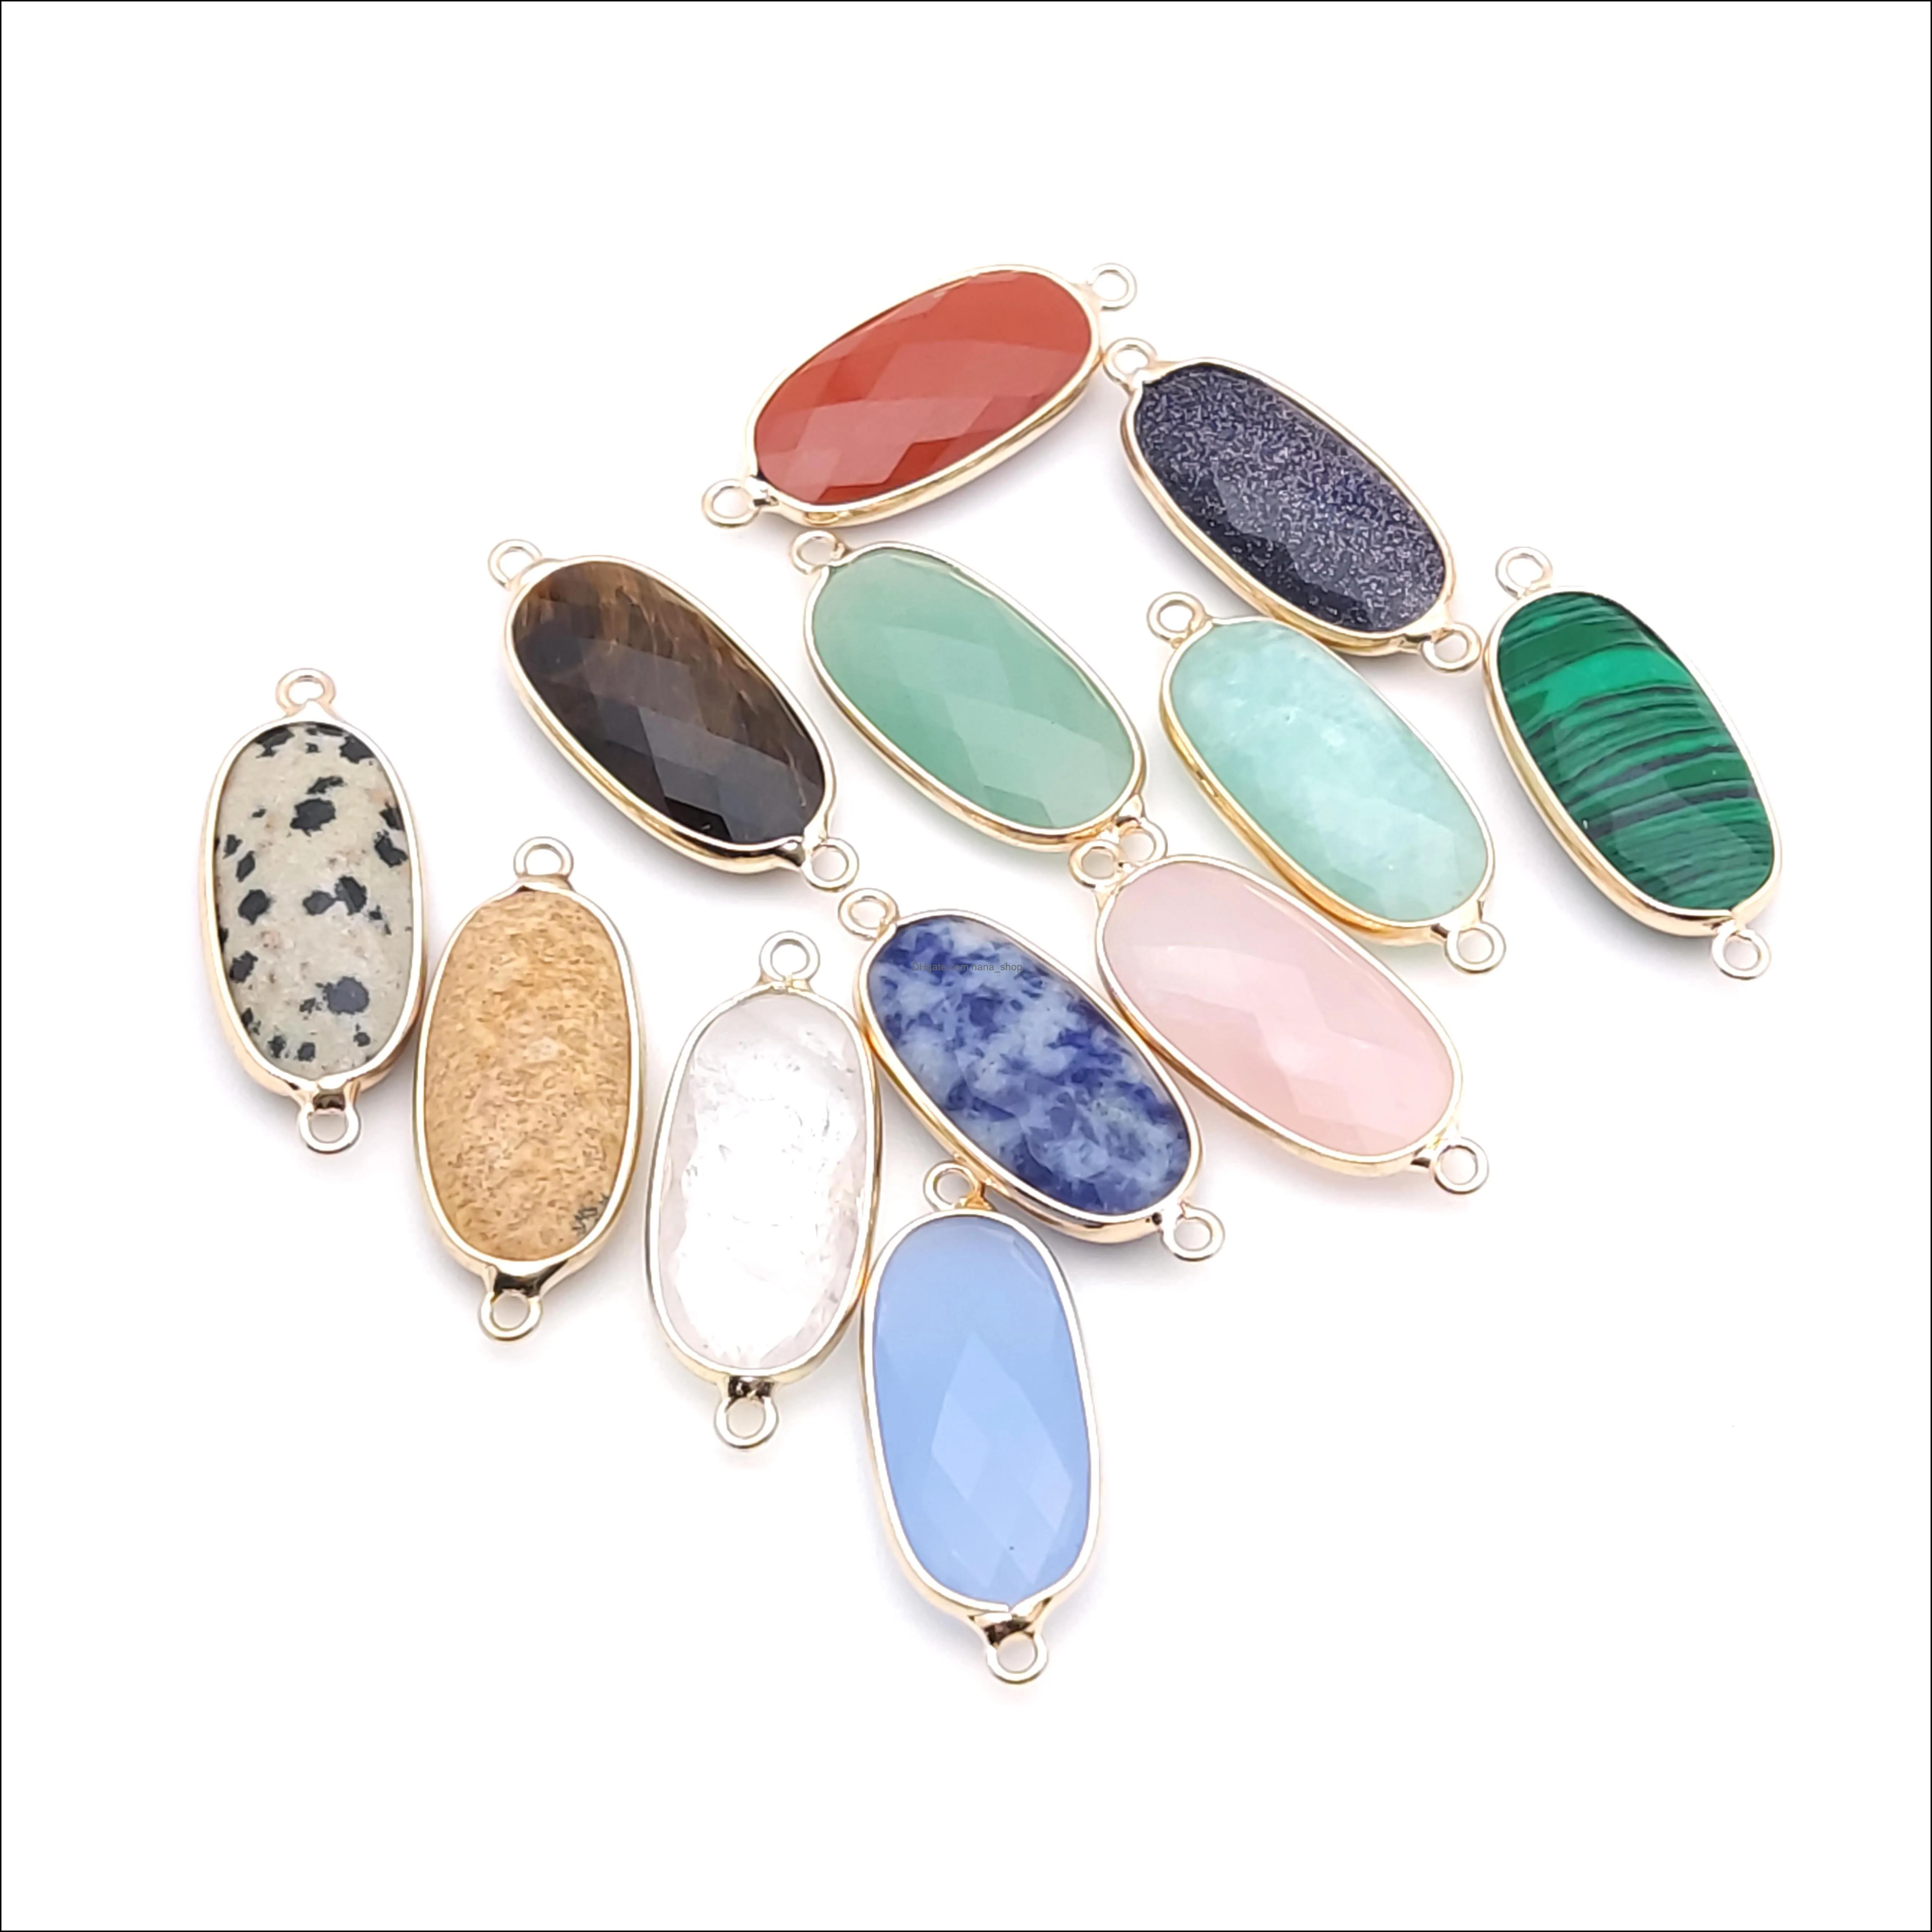 gold edged natural stone charms green rose quartz crystal connector pendant for earrings necklace jewelry making wholesale